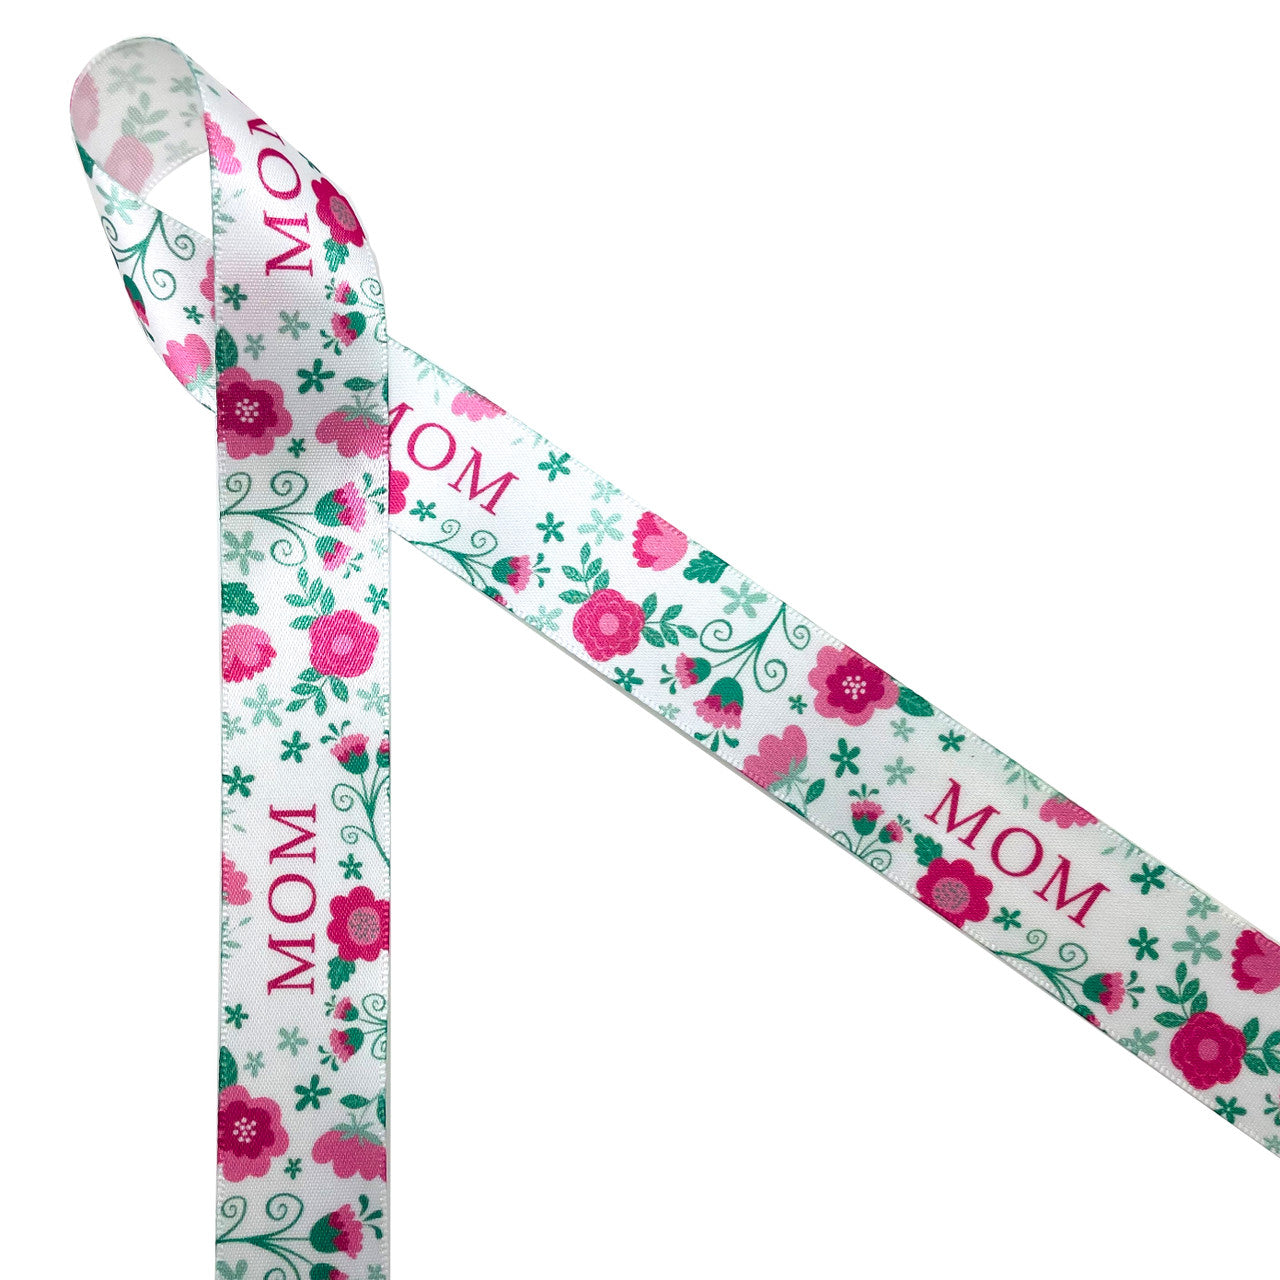 Mom in pink tosses with pink, rose gold and sage floral designs printed on 7/8" white single face satin ribbon is perfect for celebrating Mother's Day! This is a perfect ribbon for gift wrap, Mother's Day brunch decor, floral design, table design and crafts! Be sure to have this ribbon on hand for all the special Moms in your life! Our ribbon is designed and printed in the USA